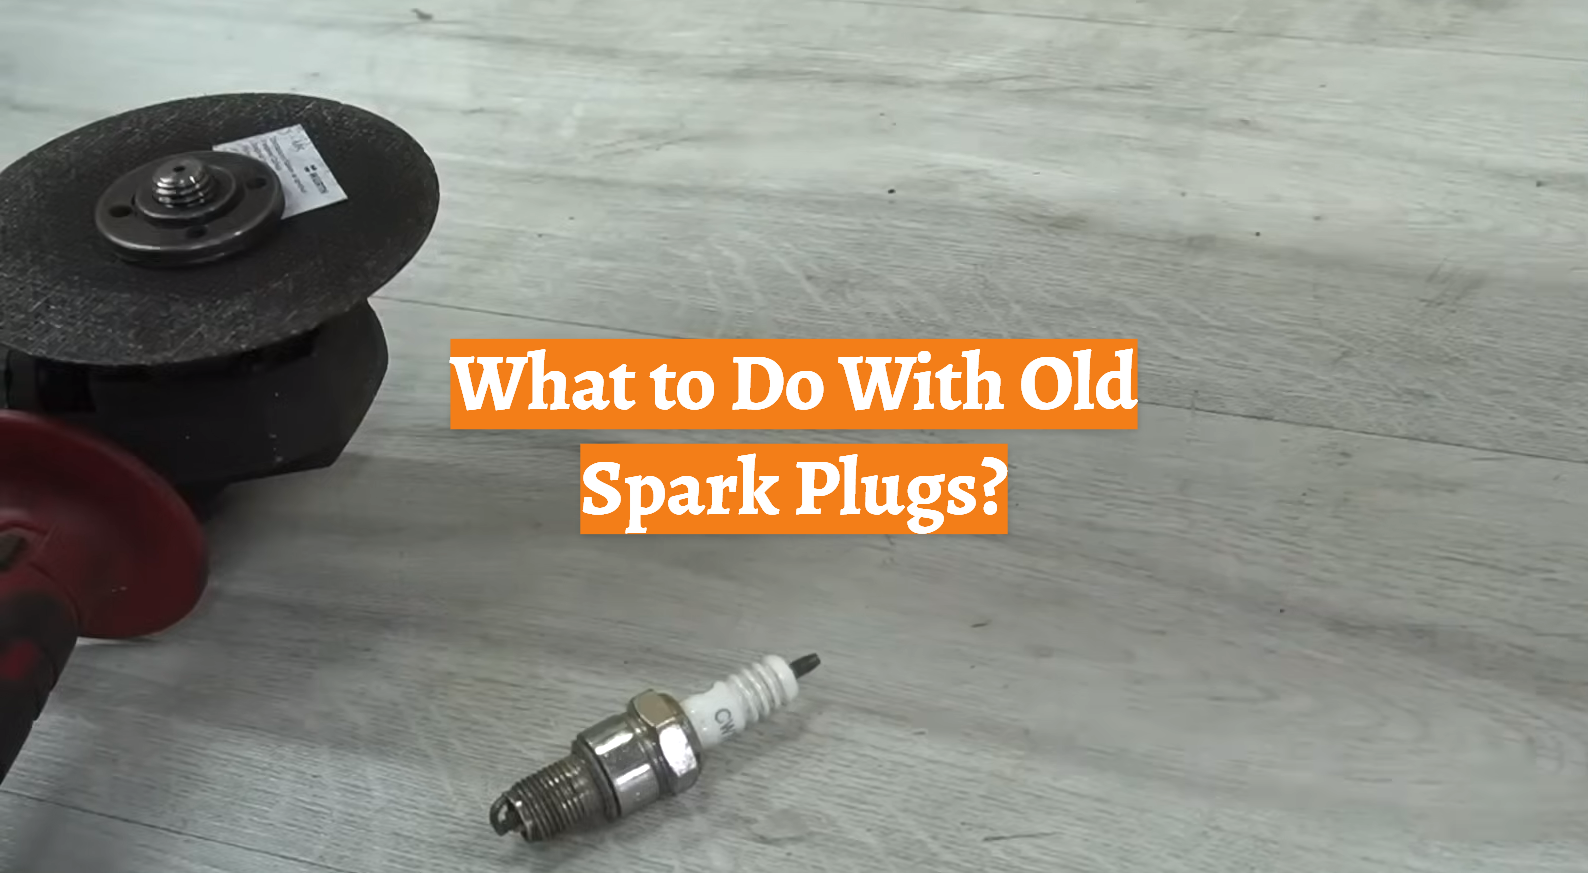 What to Do With Old Spark Plugs?